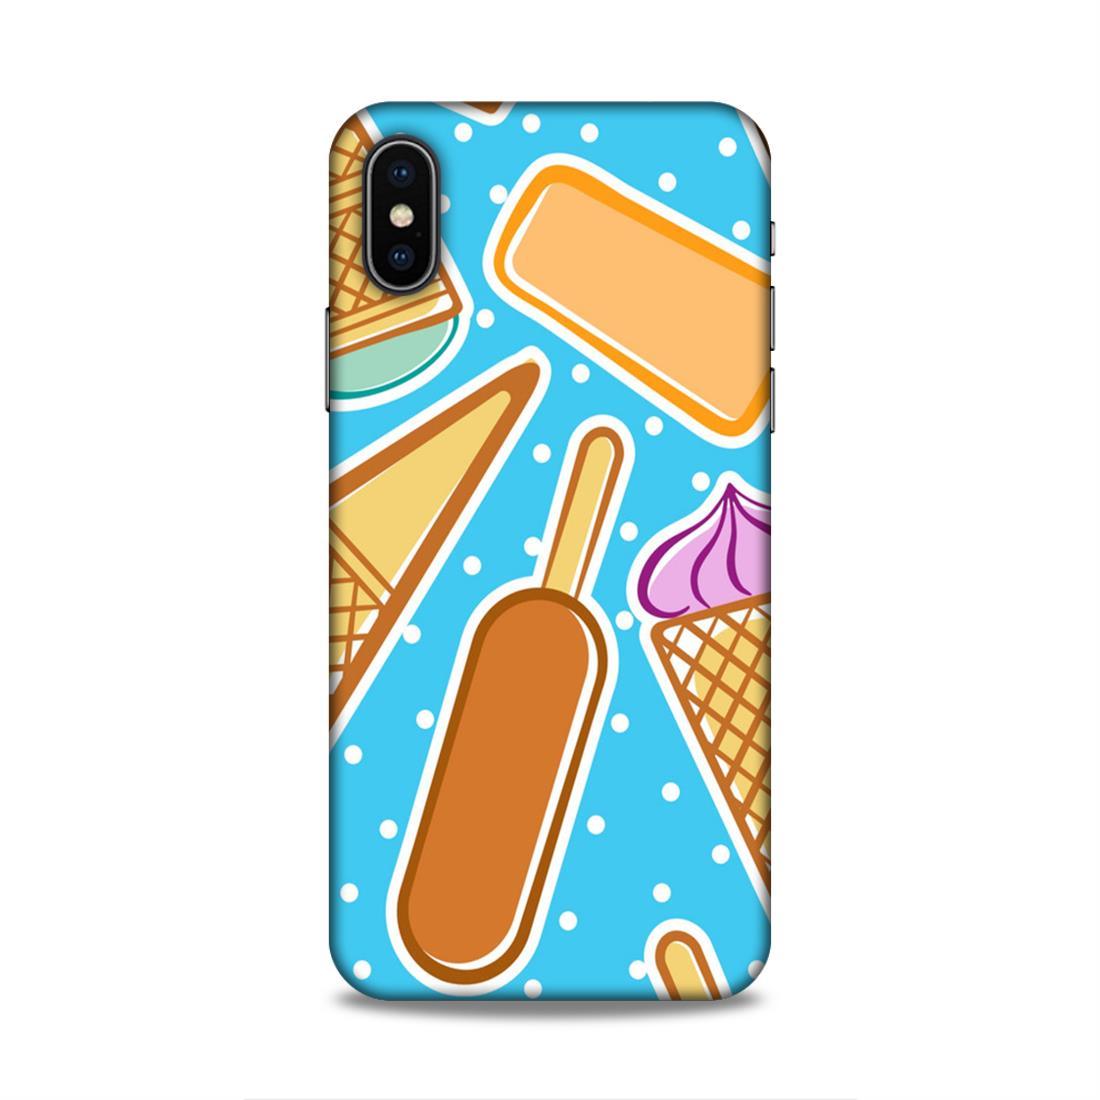 Candy Corn Blue iPhone X Mobile Cover Case